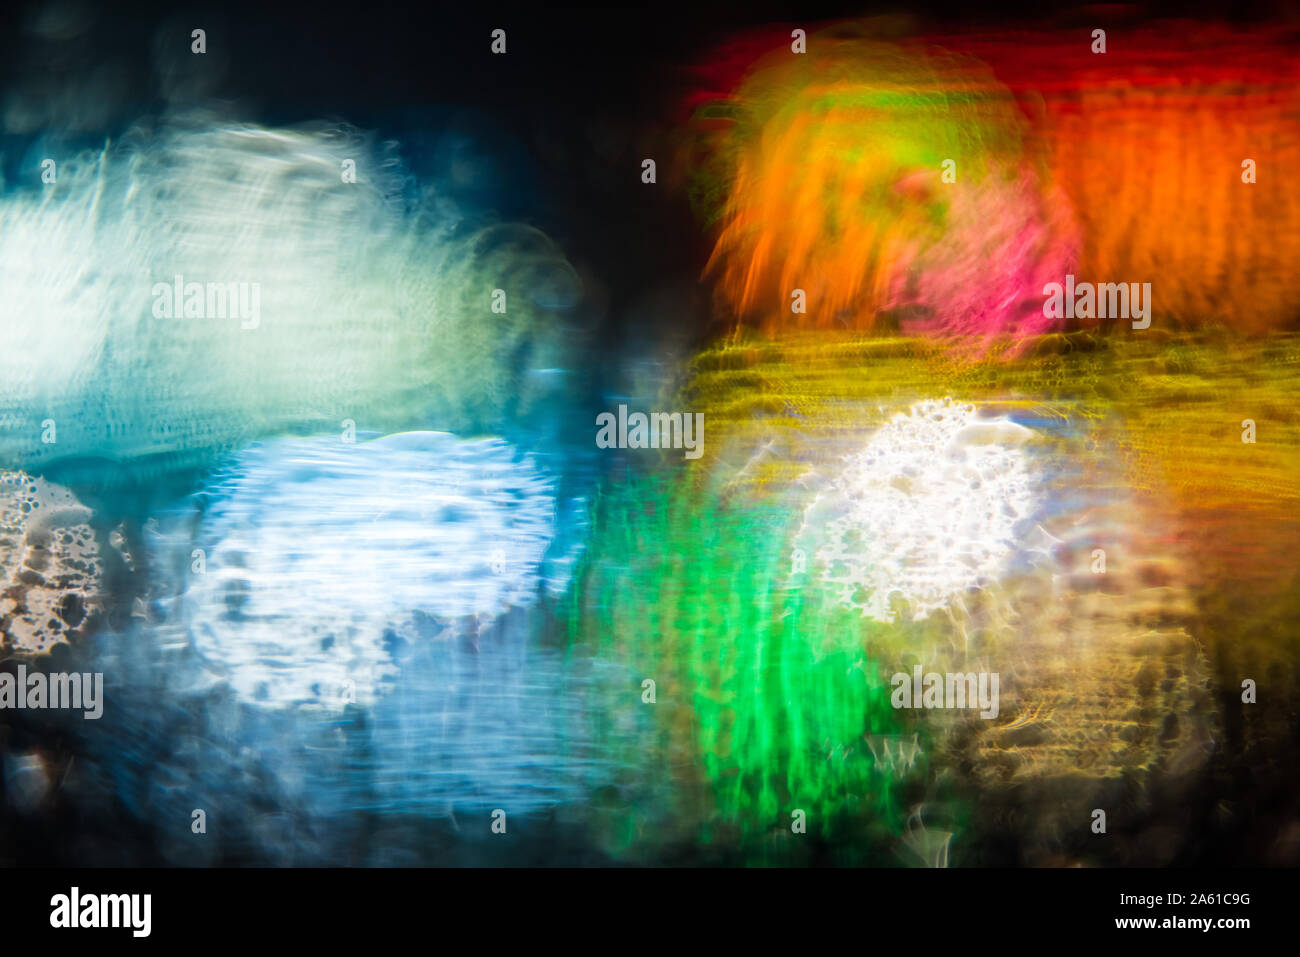 abstract out of focus bold coloured lights shot on the street rain on a car window, high quality good for backgrounds and eye catching advertising. Stock Photo